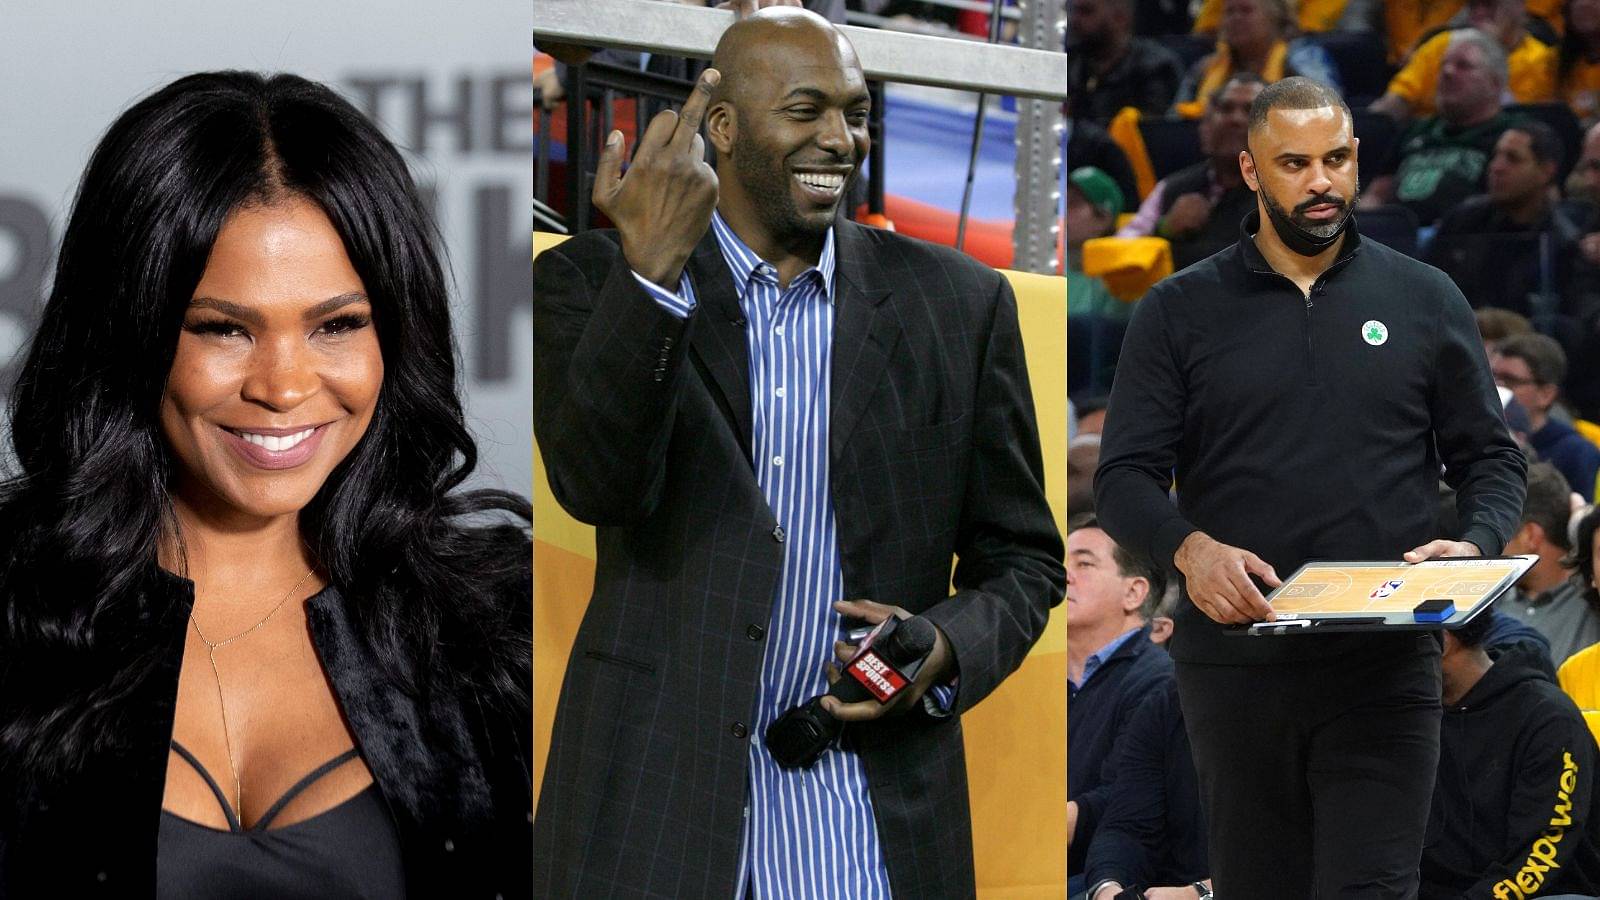 “Nia Long is a Bad B*tch”: John Salley Sends His Heart Out to Actress While Diminishing Ime Udoka's Chances of Getting a Coaching Job Again